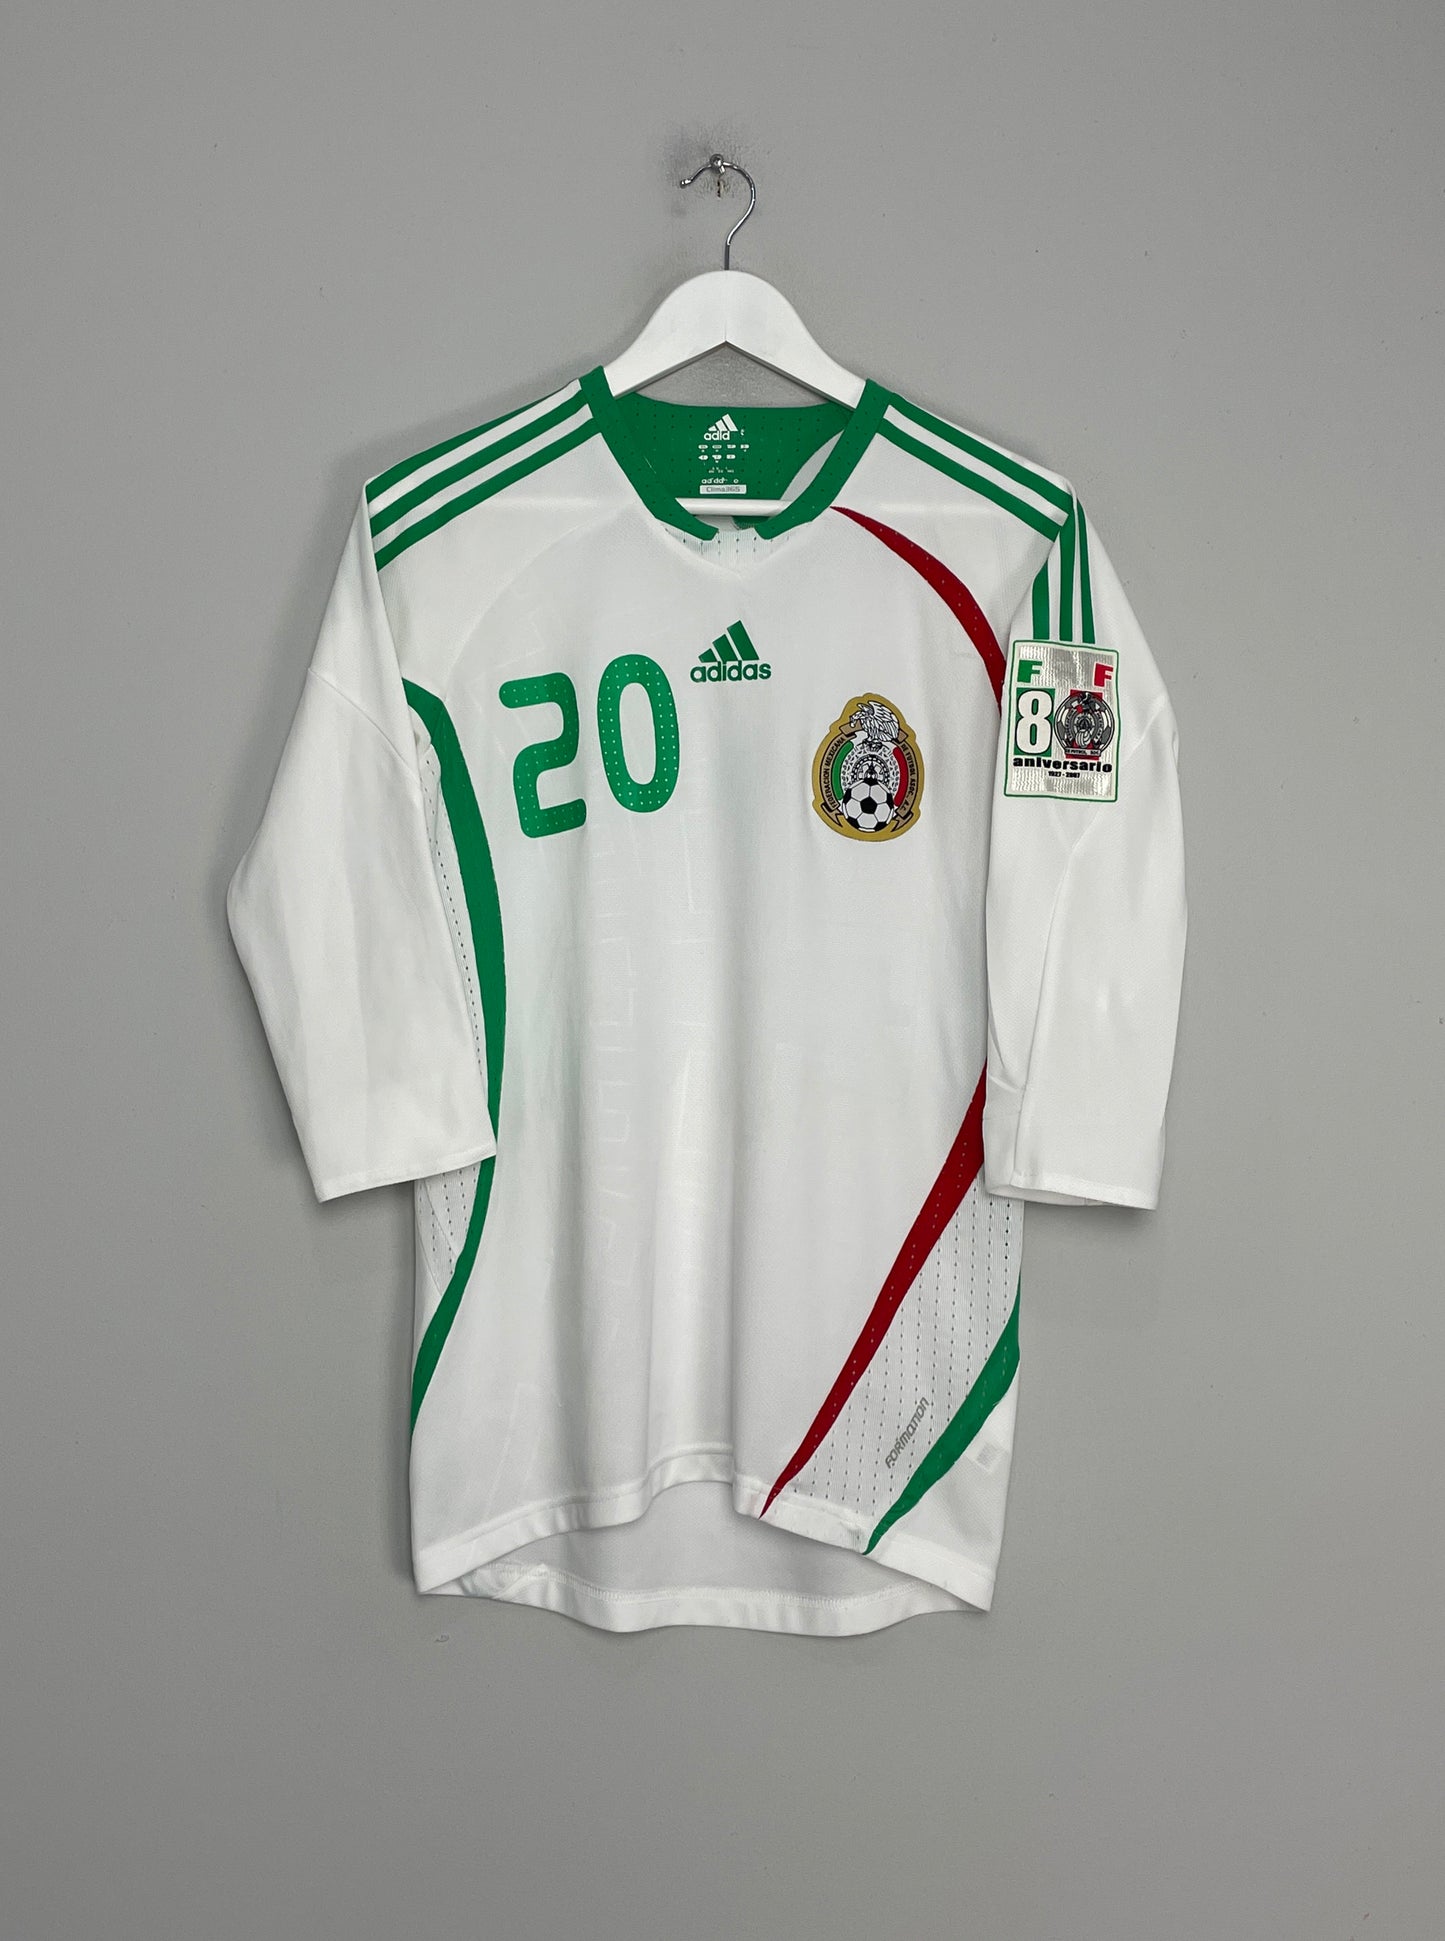 2008/09 MEXICO #20 *PLAYER ISSUE* AWAY SHIRT (M) ADIDAS